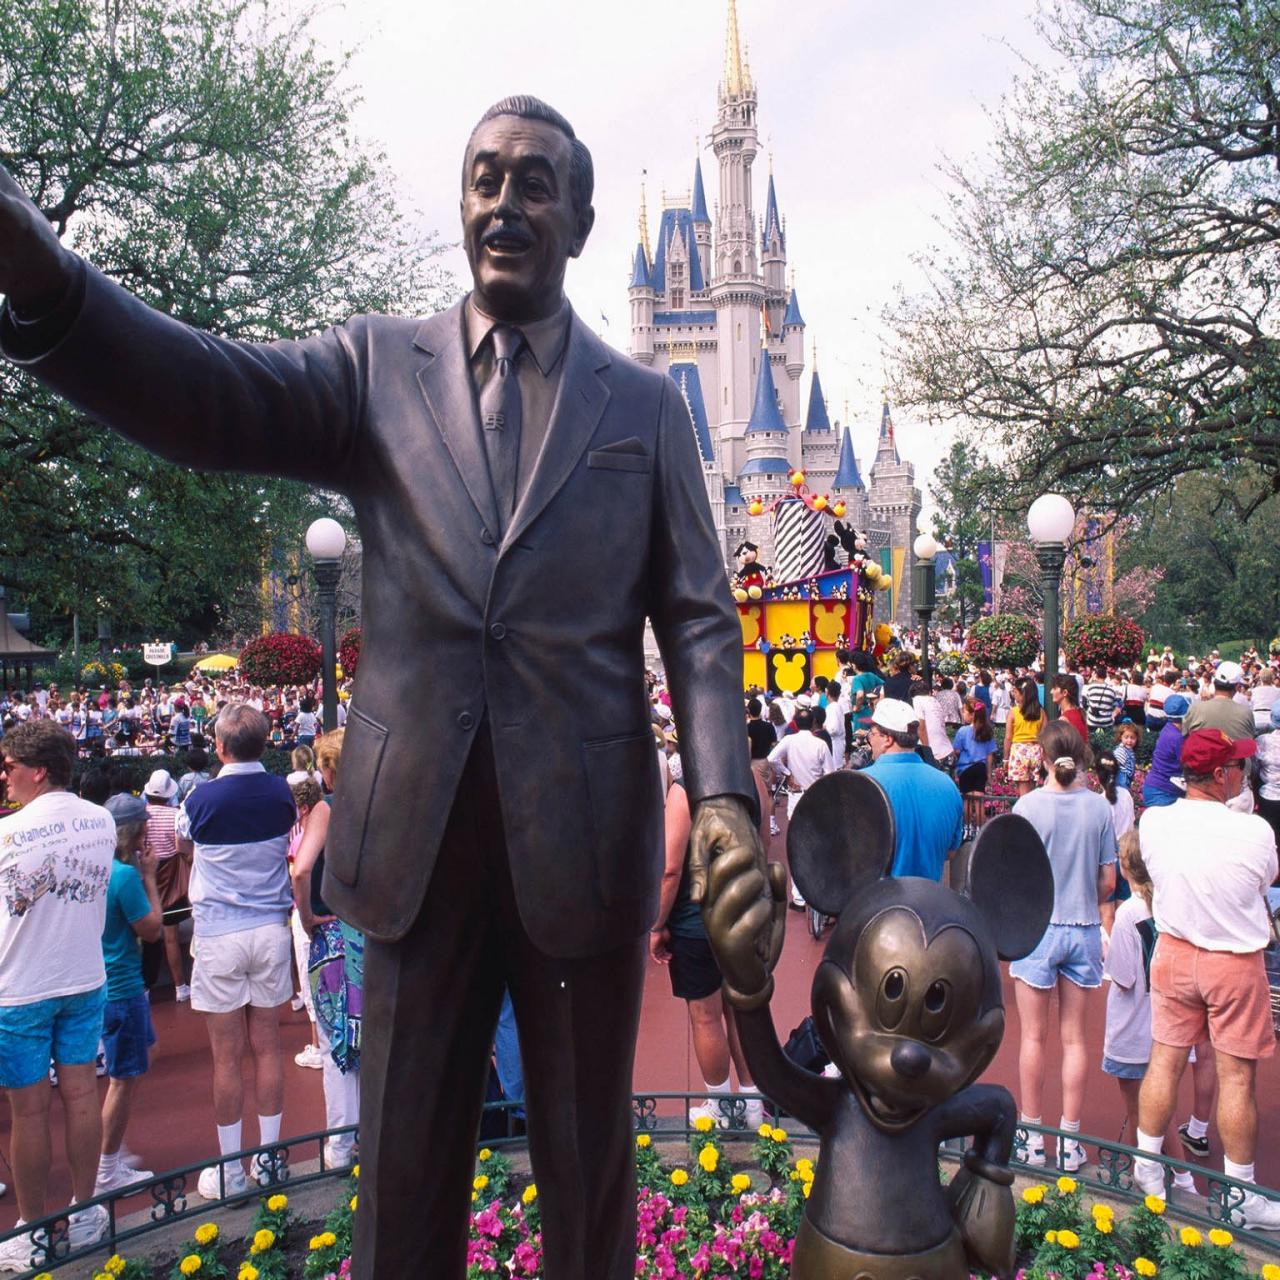 Disney Parks Insider Scoop:Taking Your Theme Park Trip To The Next Level